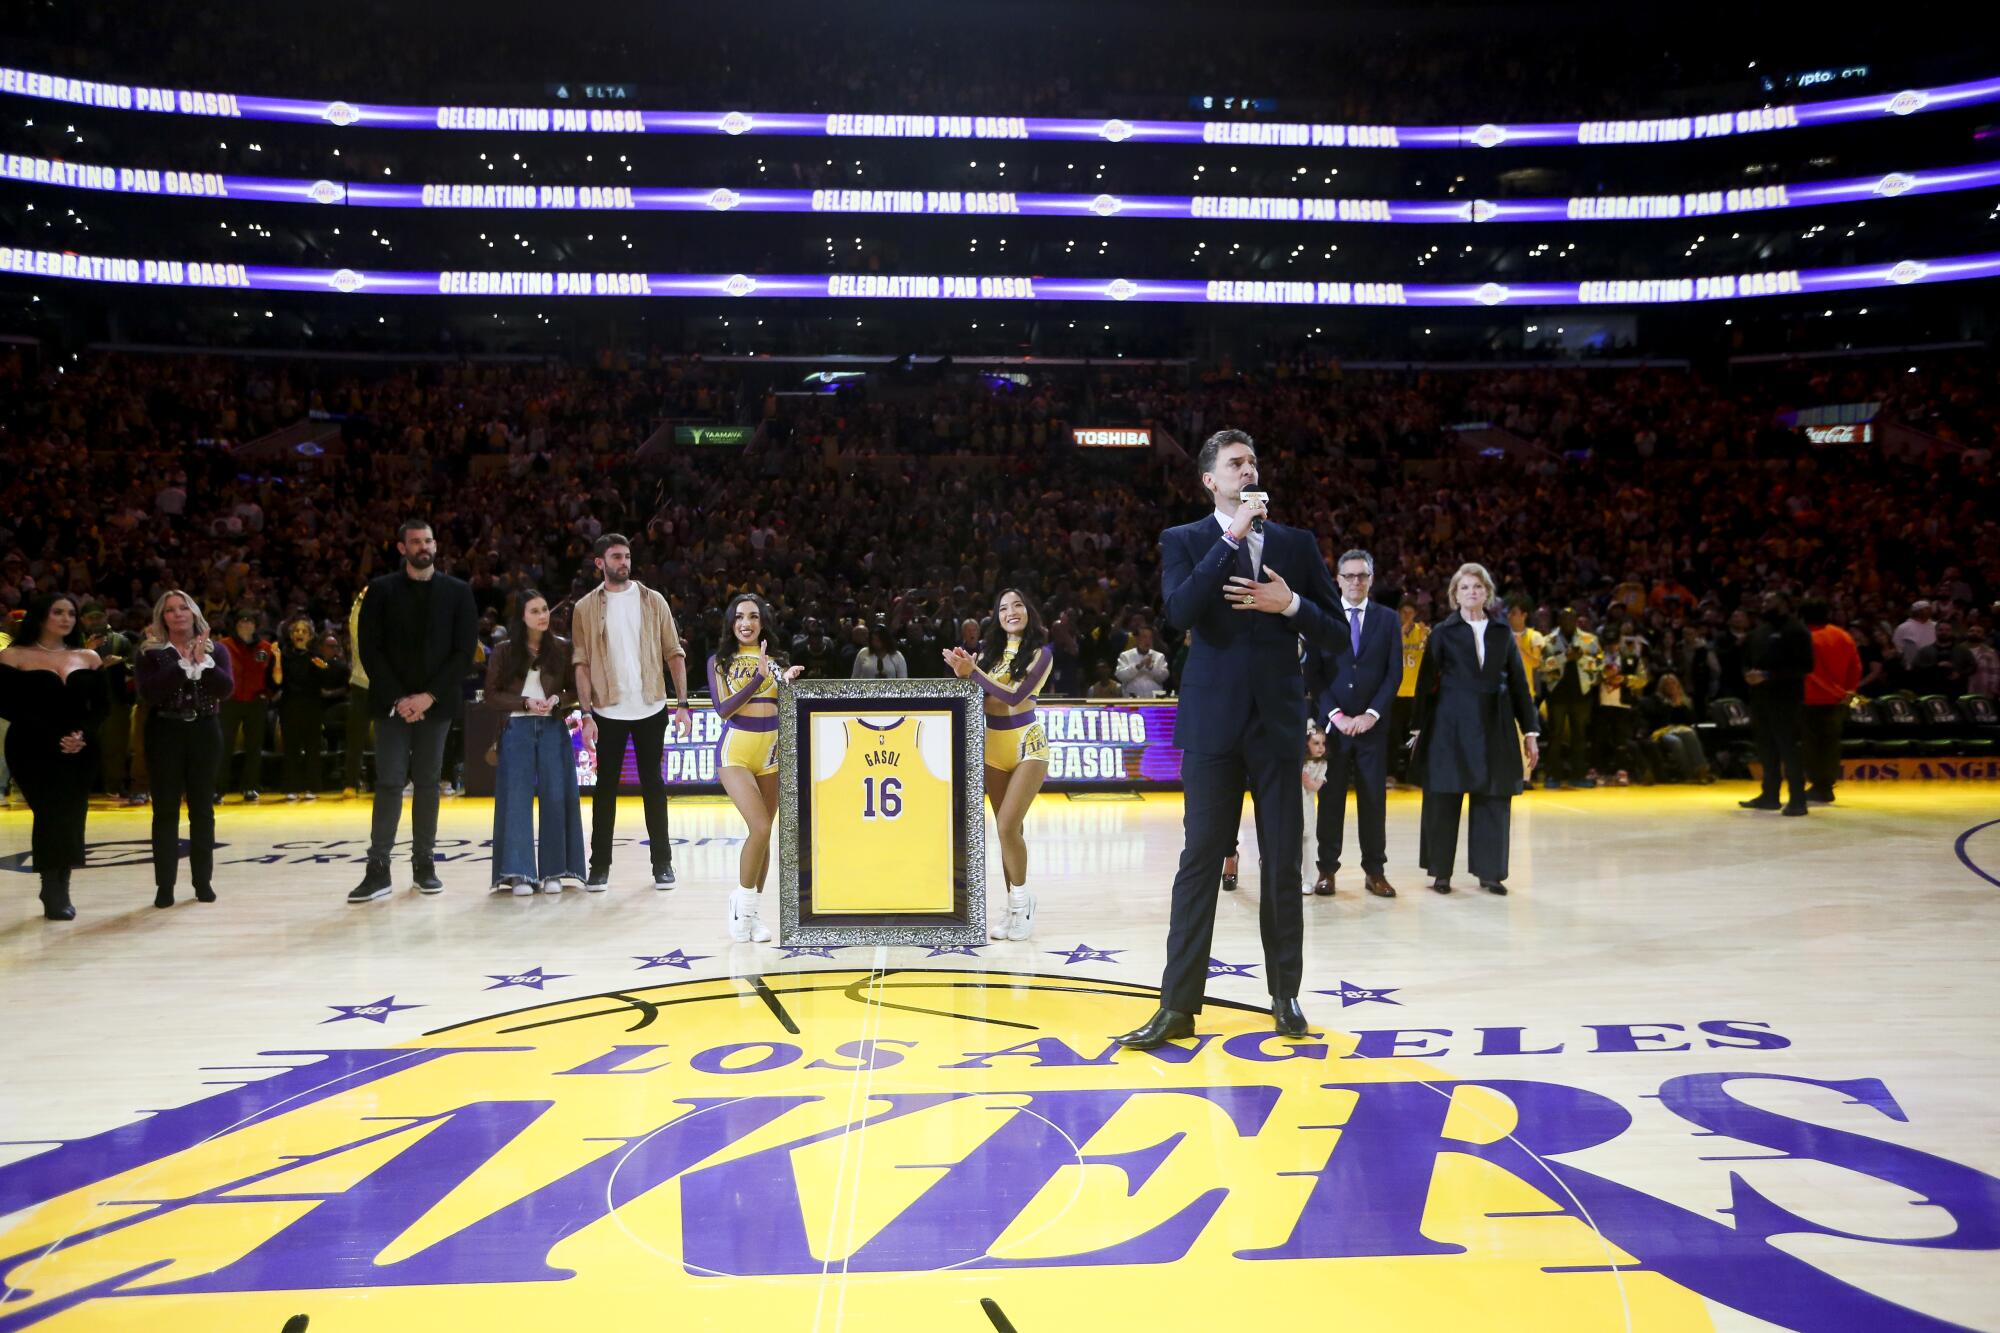 Los Angeles Lakers retiring Pau Gasol's No. 16 jersey in March 7